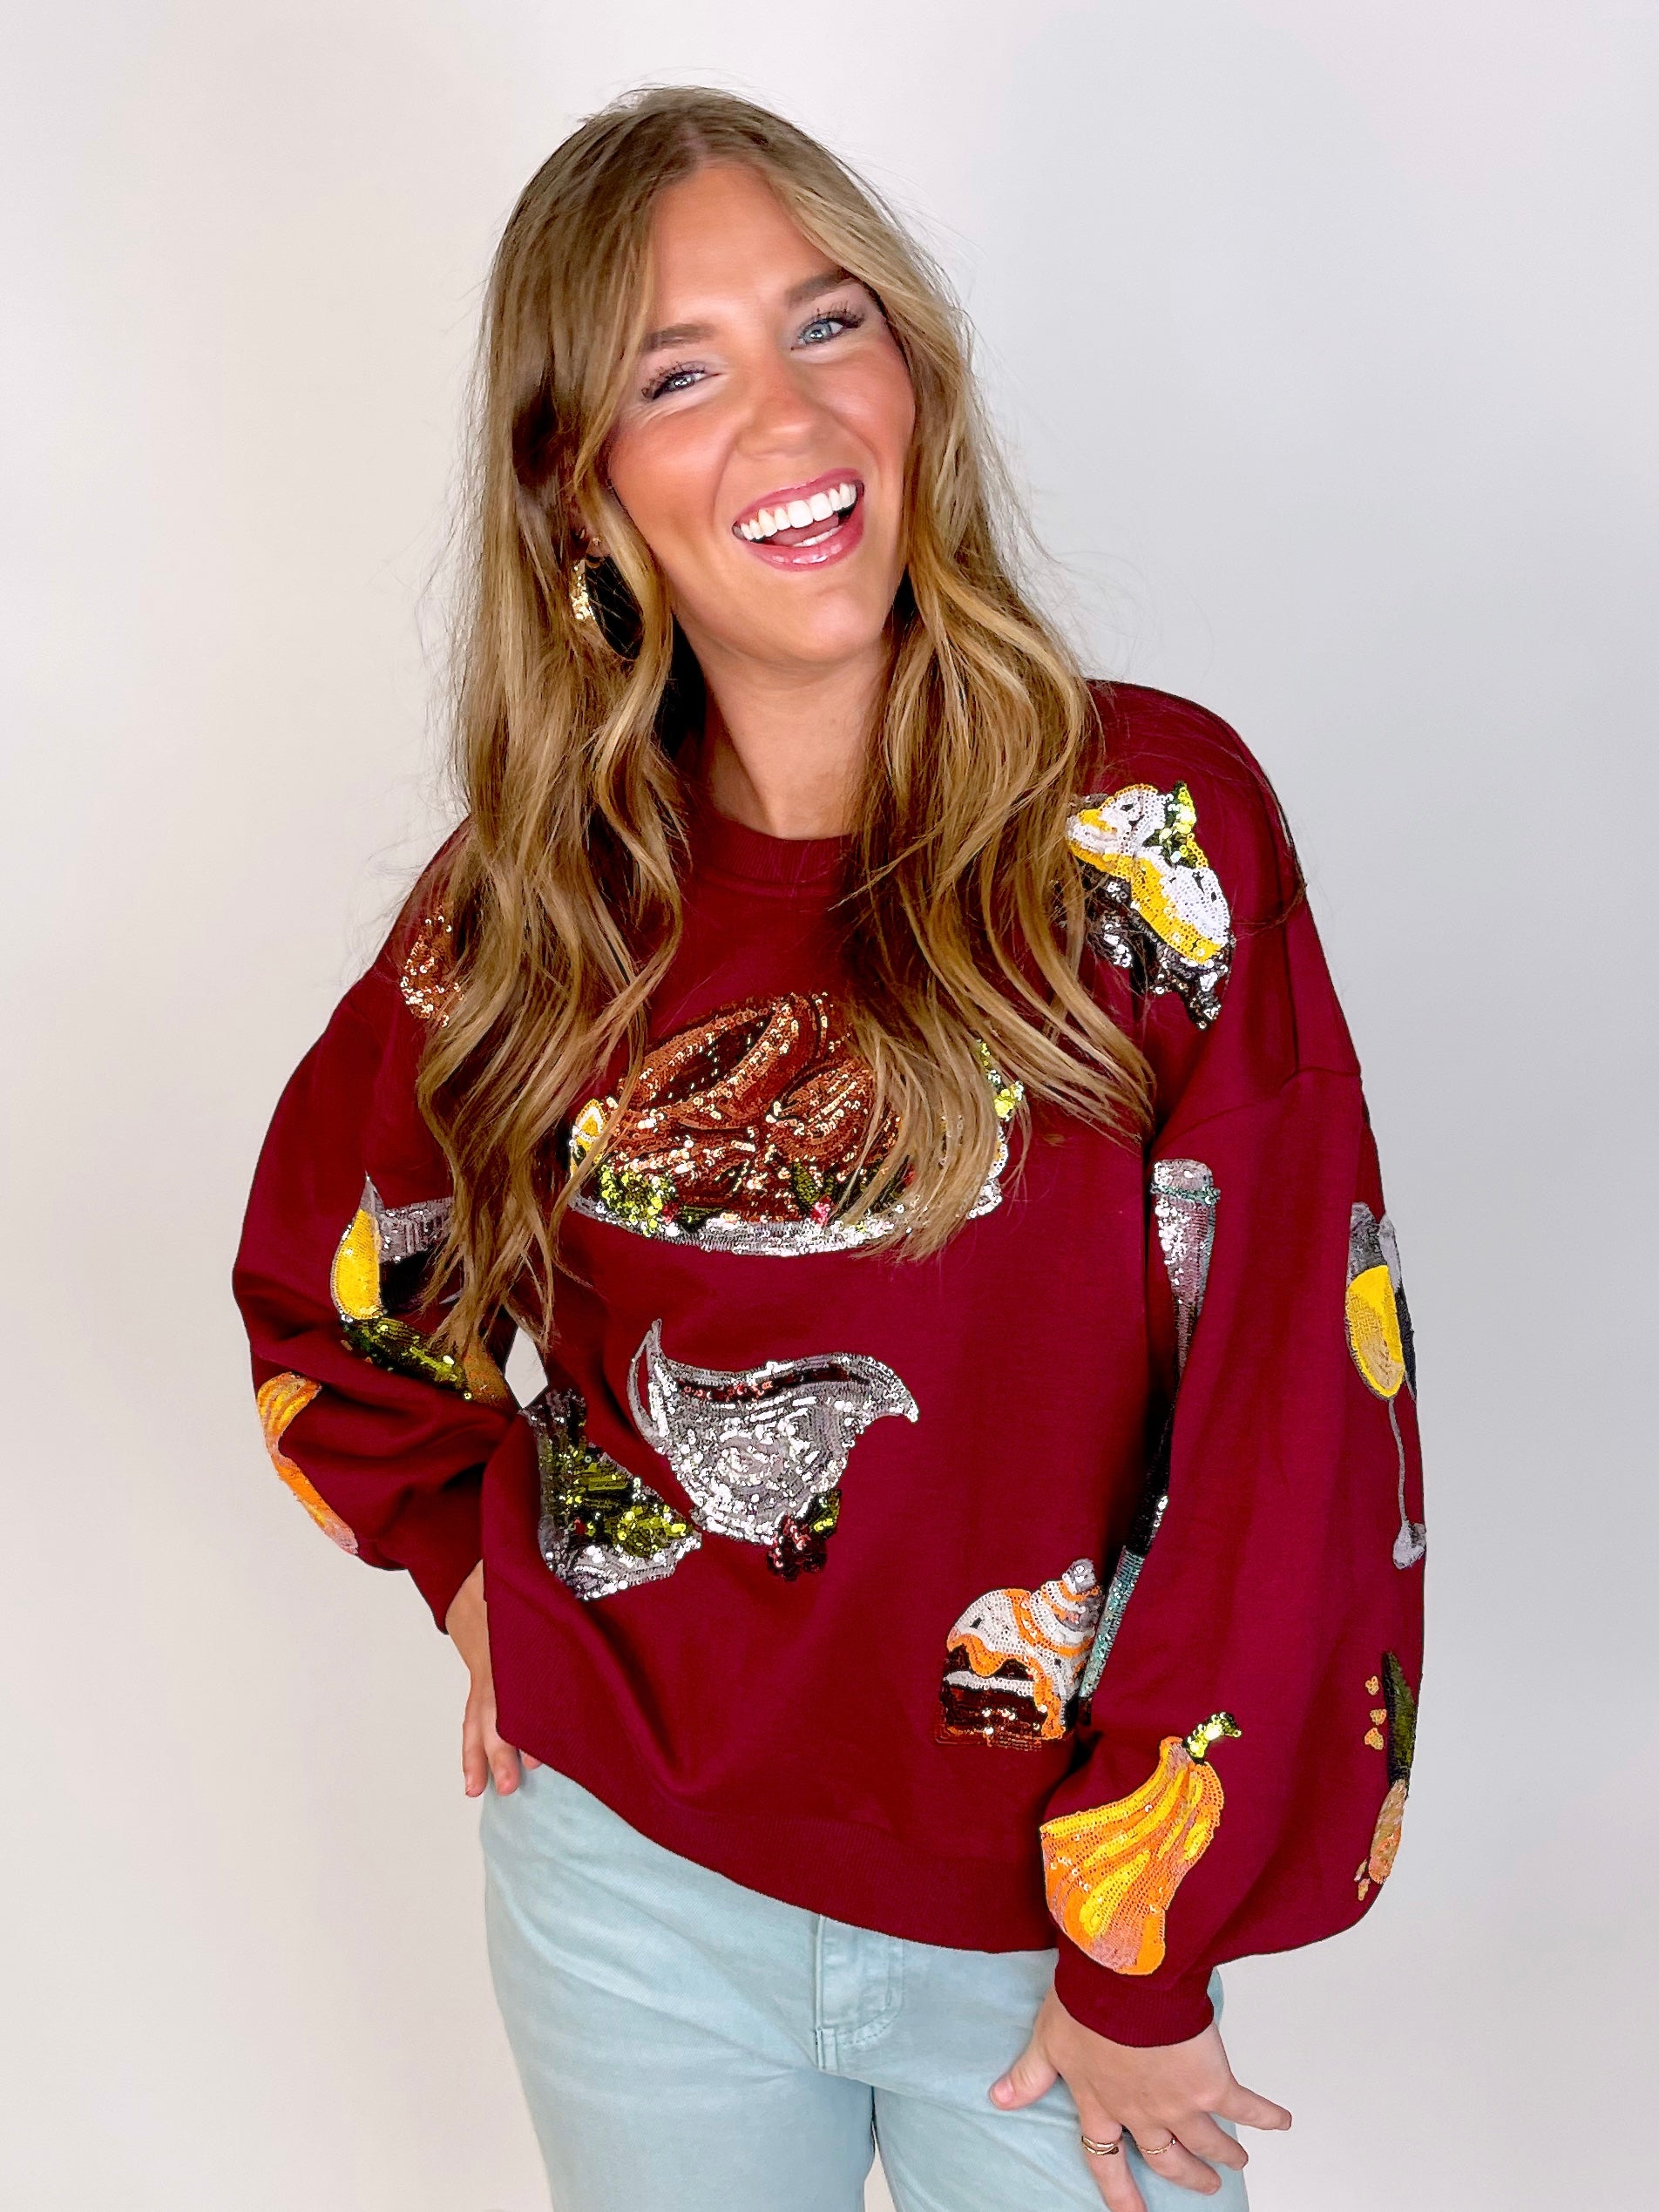 Whatever Floats Your Gravy Boat Sweatshirt | Queen of Sparkles-Long Sleeves-Queen of Sparkles-The Village Shoppe, Women’s Fashion Boutique, Shop Online and In Store - Located in Muscle Shoals, AL.